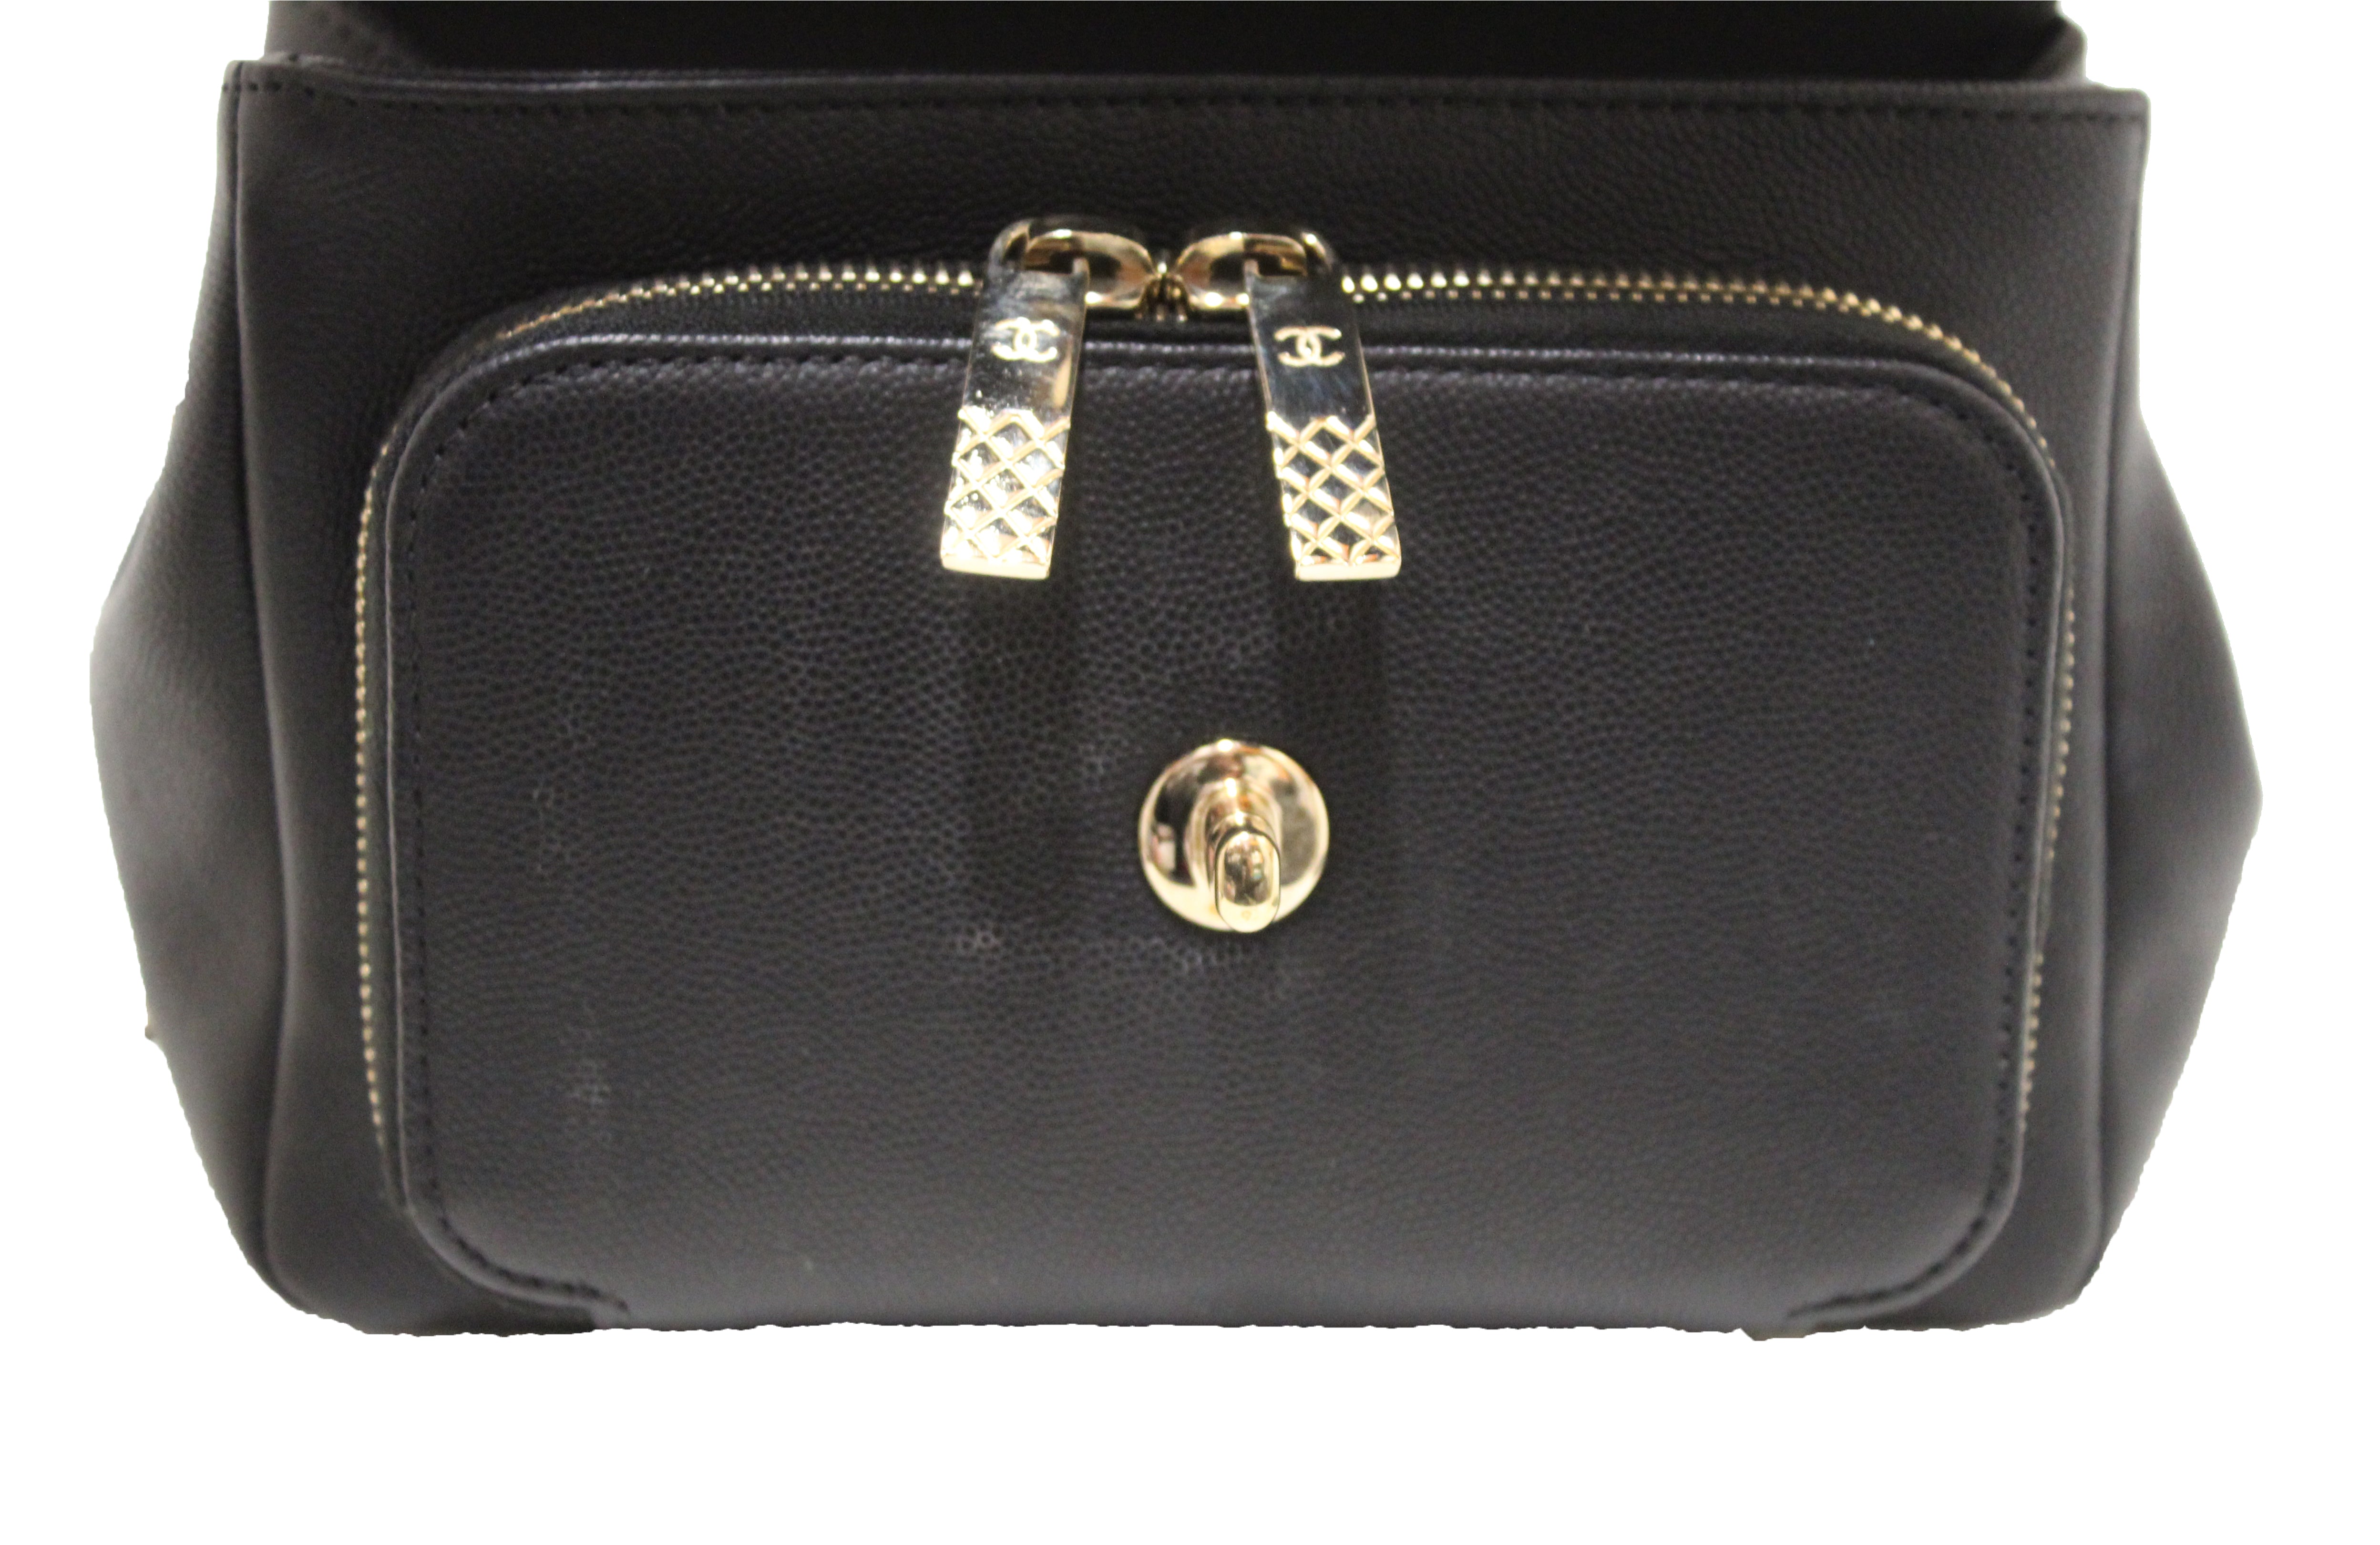 Authentic Chanel Black Caviar Leather Small Business Affinity Messenger Crossbody Bag